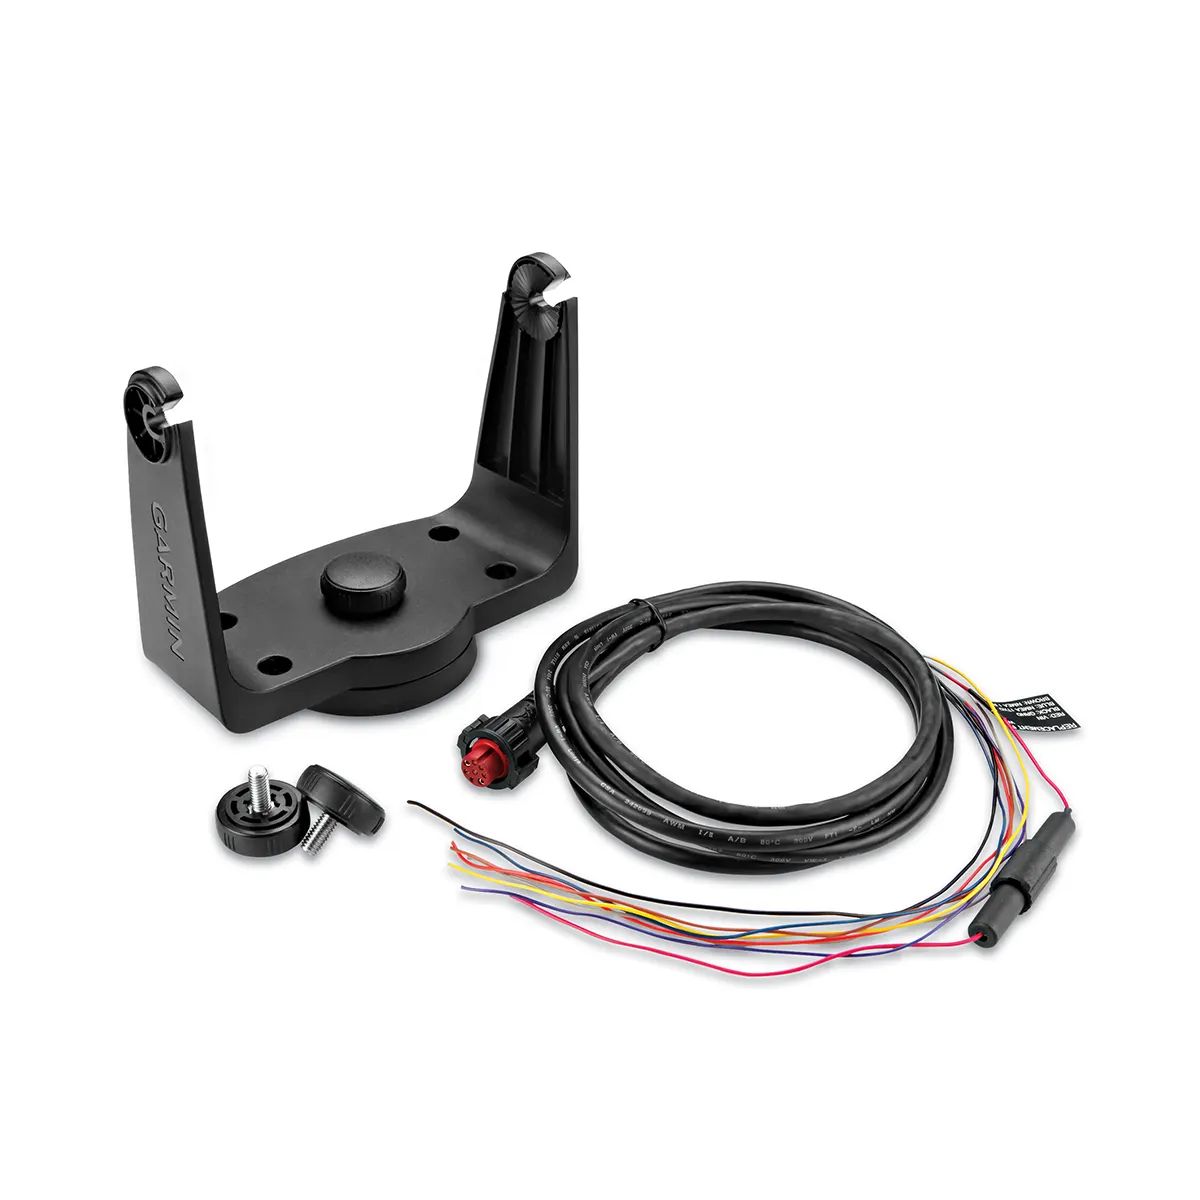 Garmin Second Mounting Station for gpsmap 5x7 series